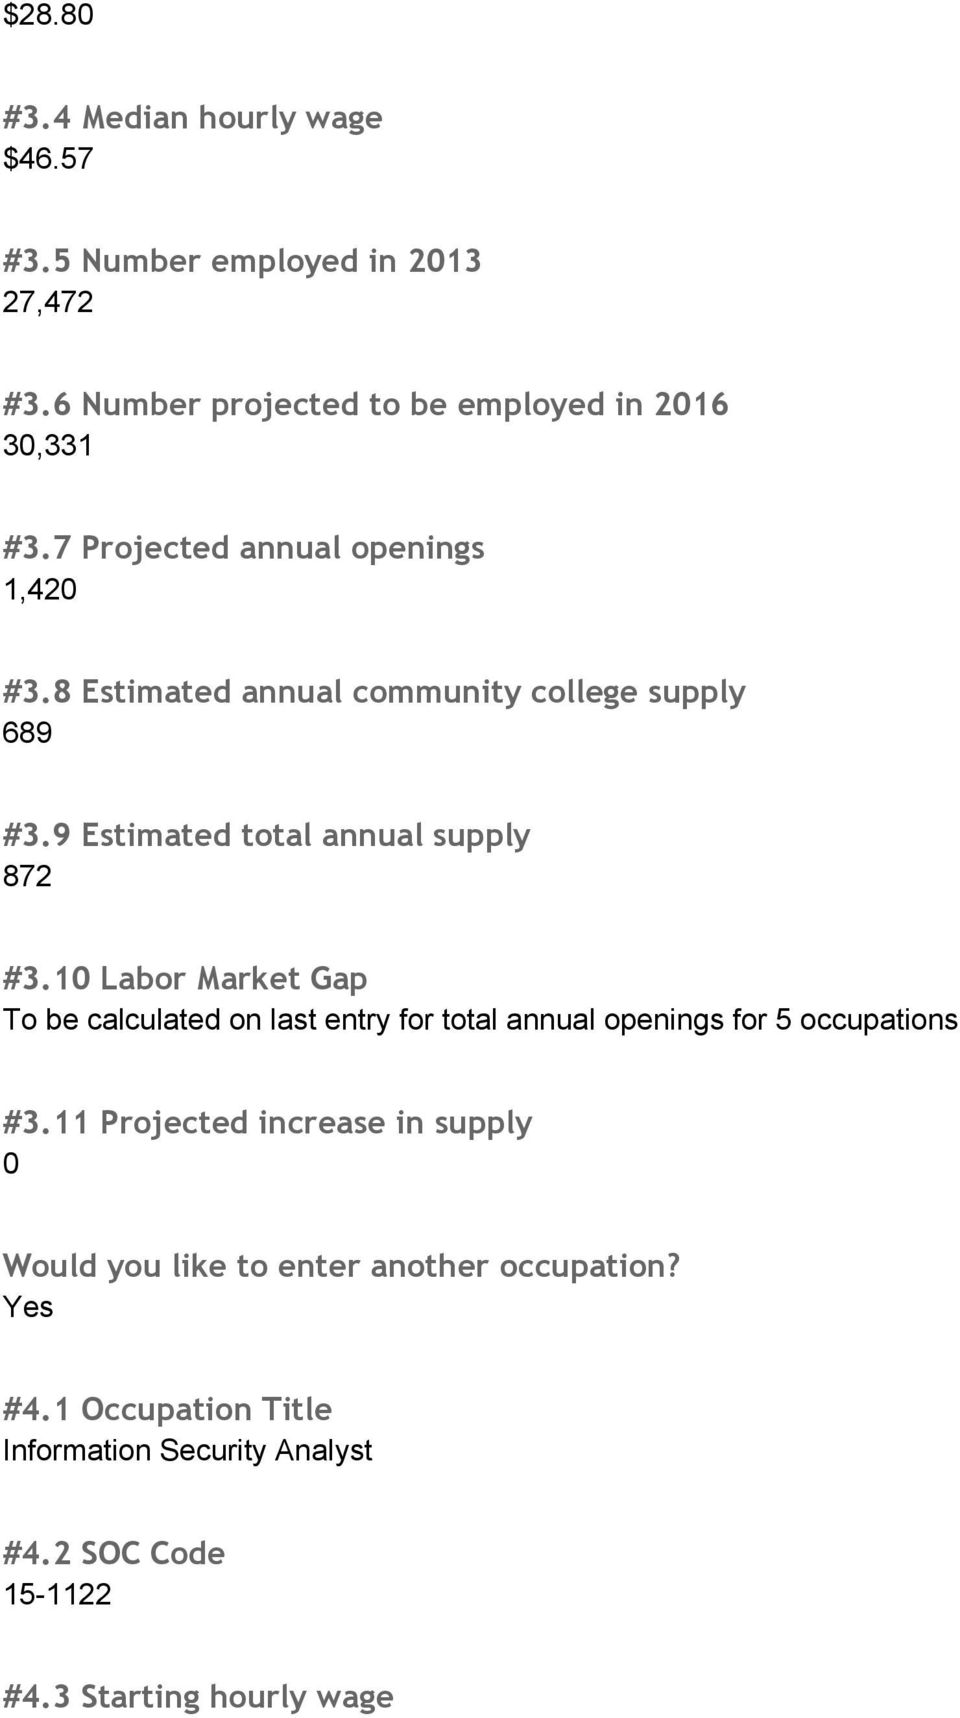 10 Labor Market Gap To be calculated on last entry for total annual openings for 5 occupations #3.